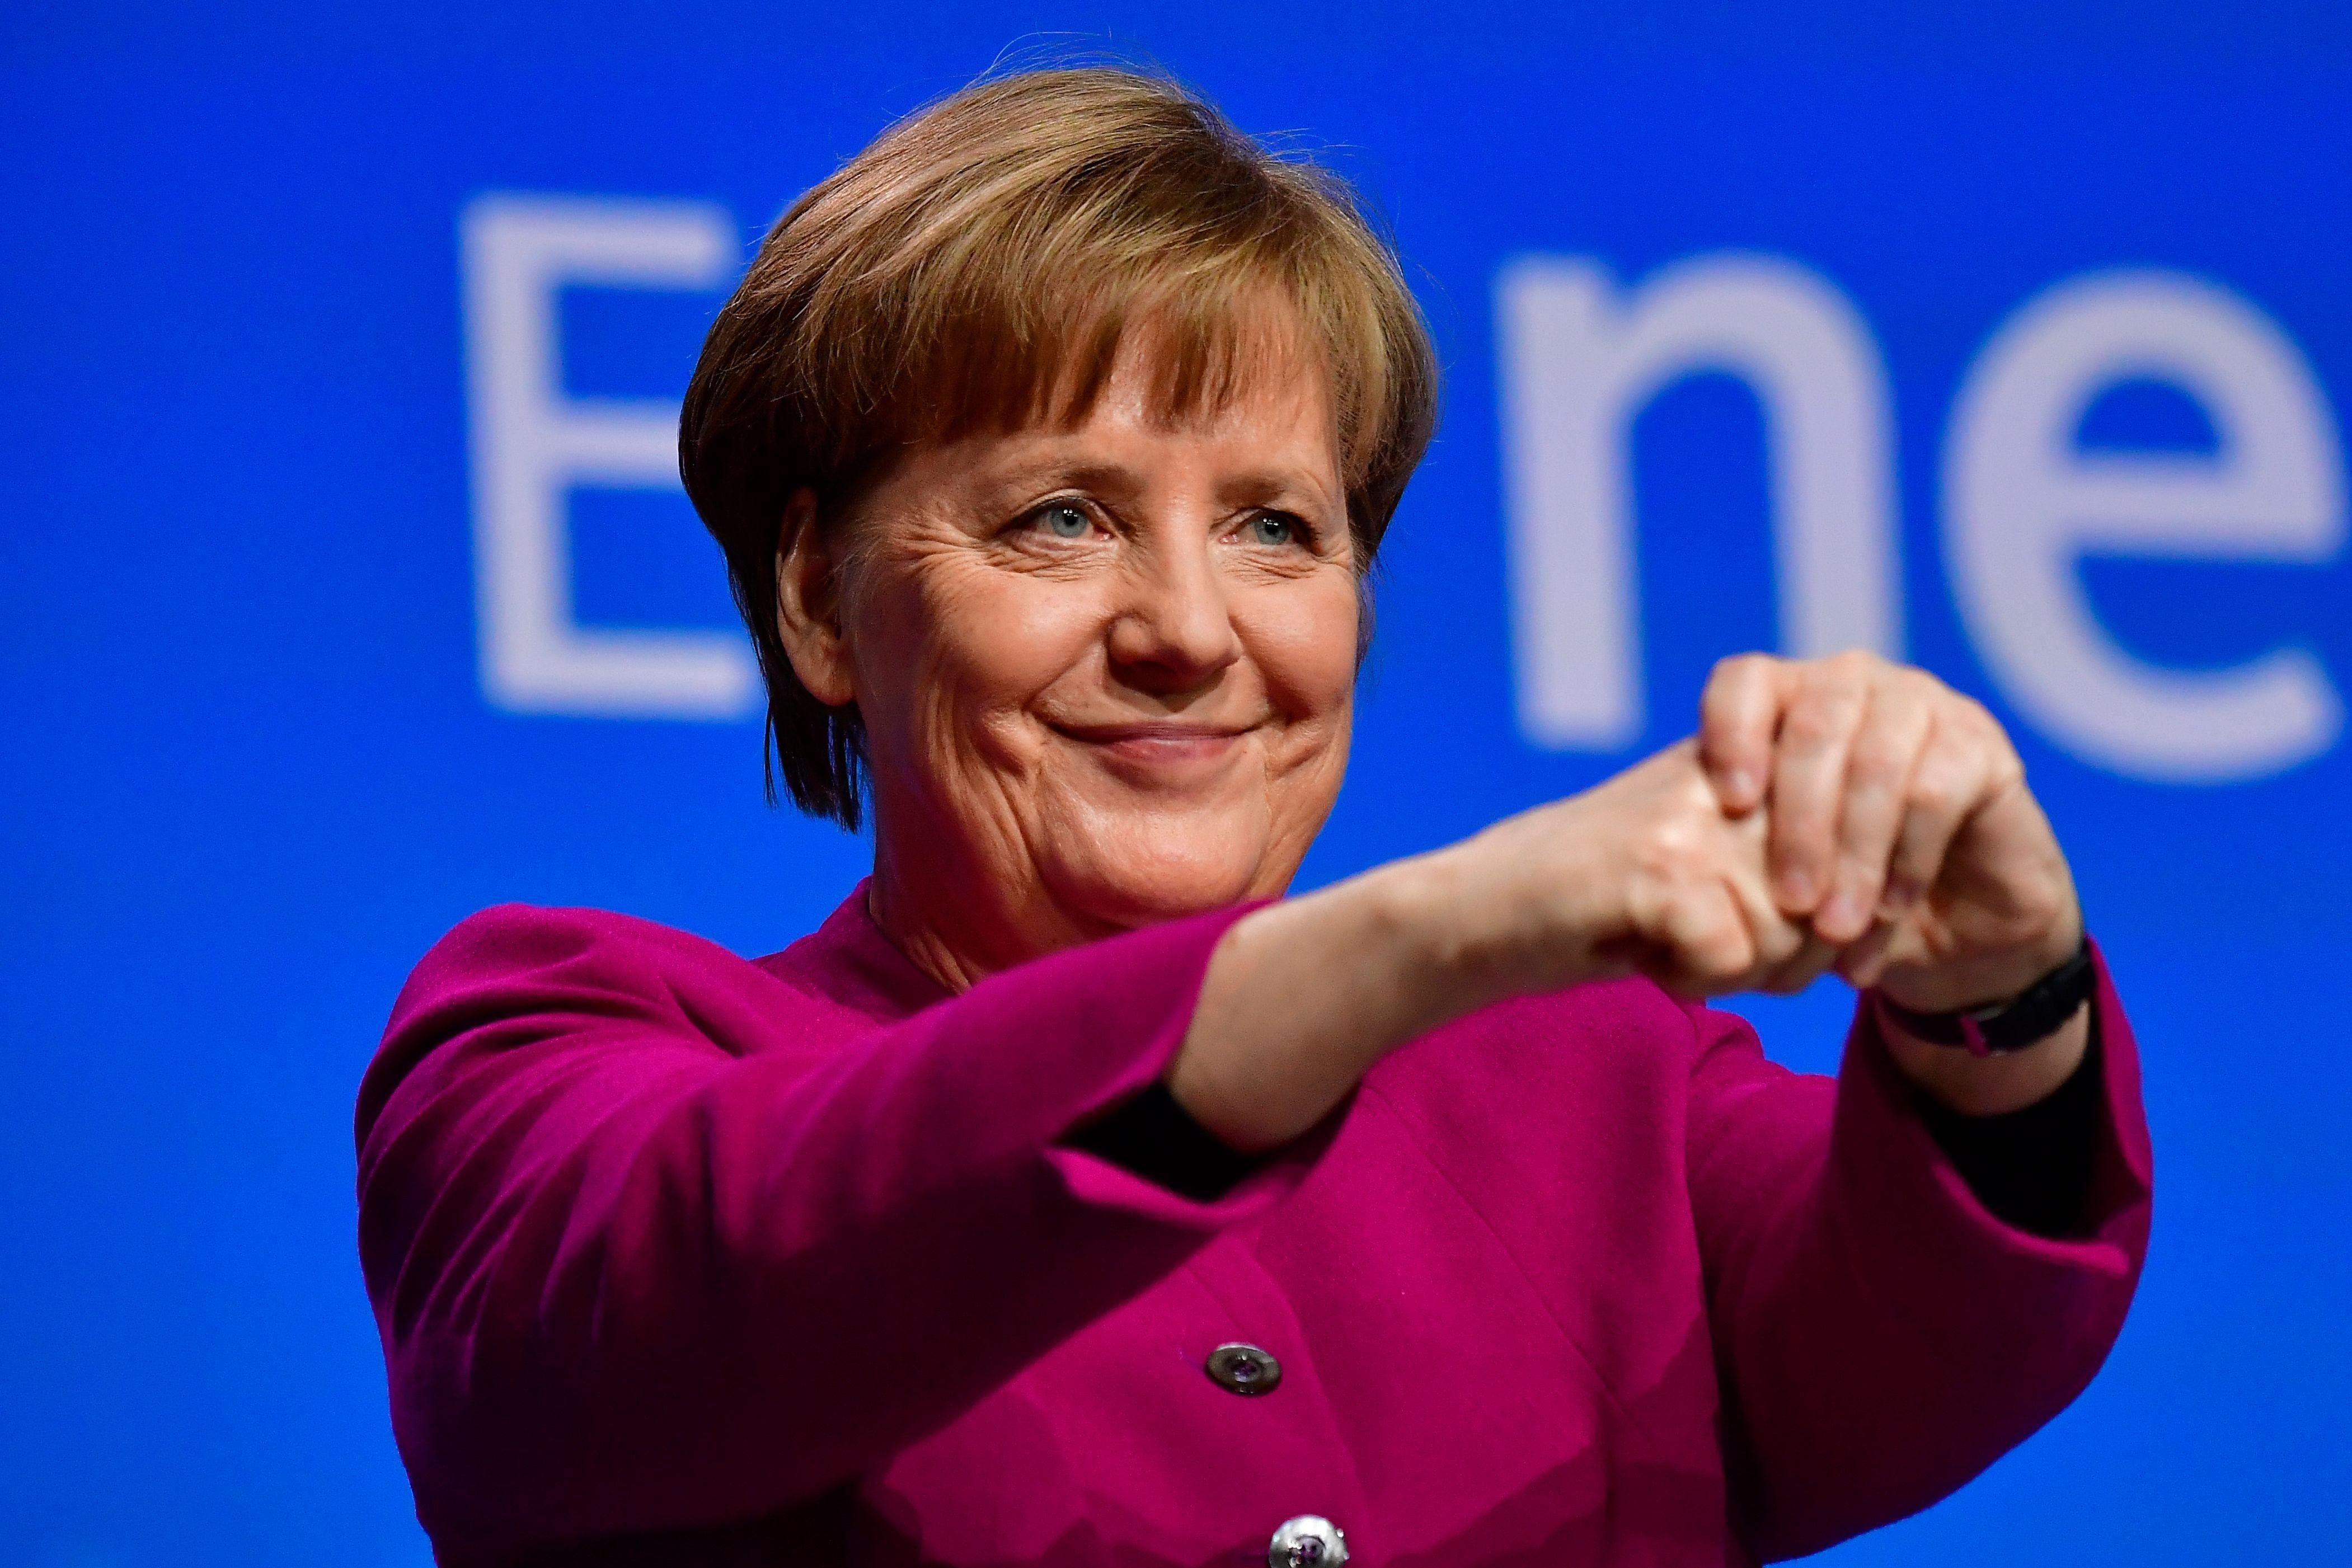 German Chancellor and leader of the conservative Christian Democratic Union (CDU) party Angela Merkel thanks delegates after giving a speech during the CDU's party congress on February 26, 2018 in Berlin.The CDU party of German Chancellor Angela Merkel is holding the congress to approve the coalition deal between the conservatives and the Social Democrats.